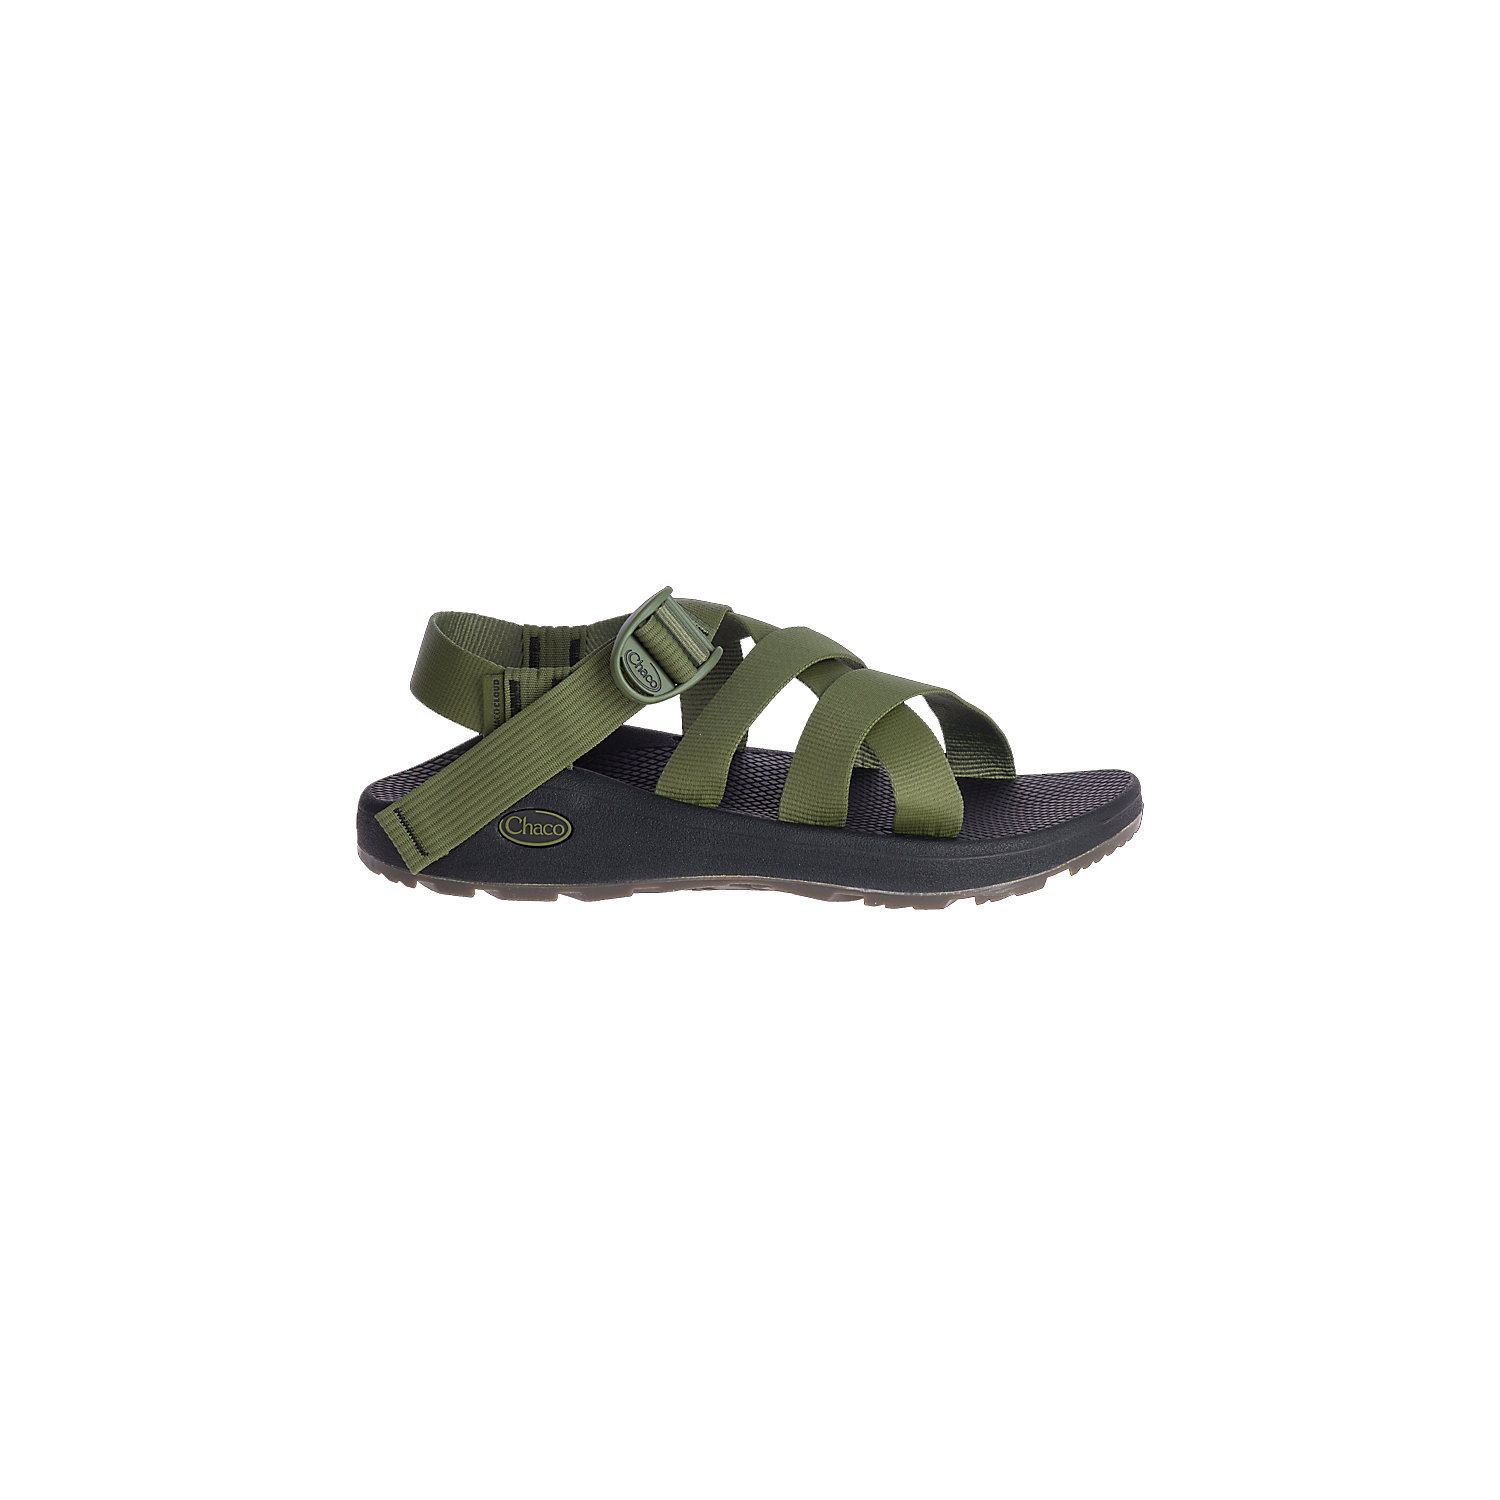 Chaco Mens Banded Z/Cloud Sandal